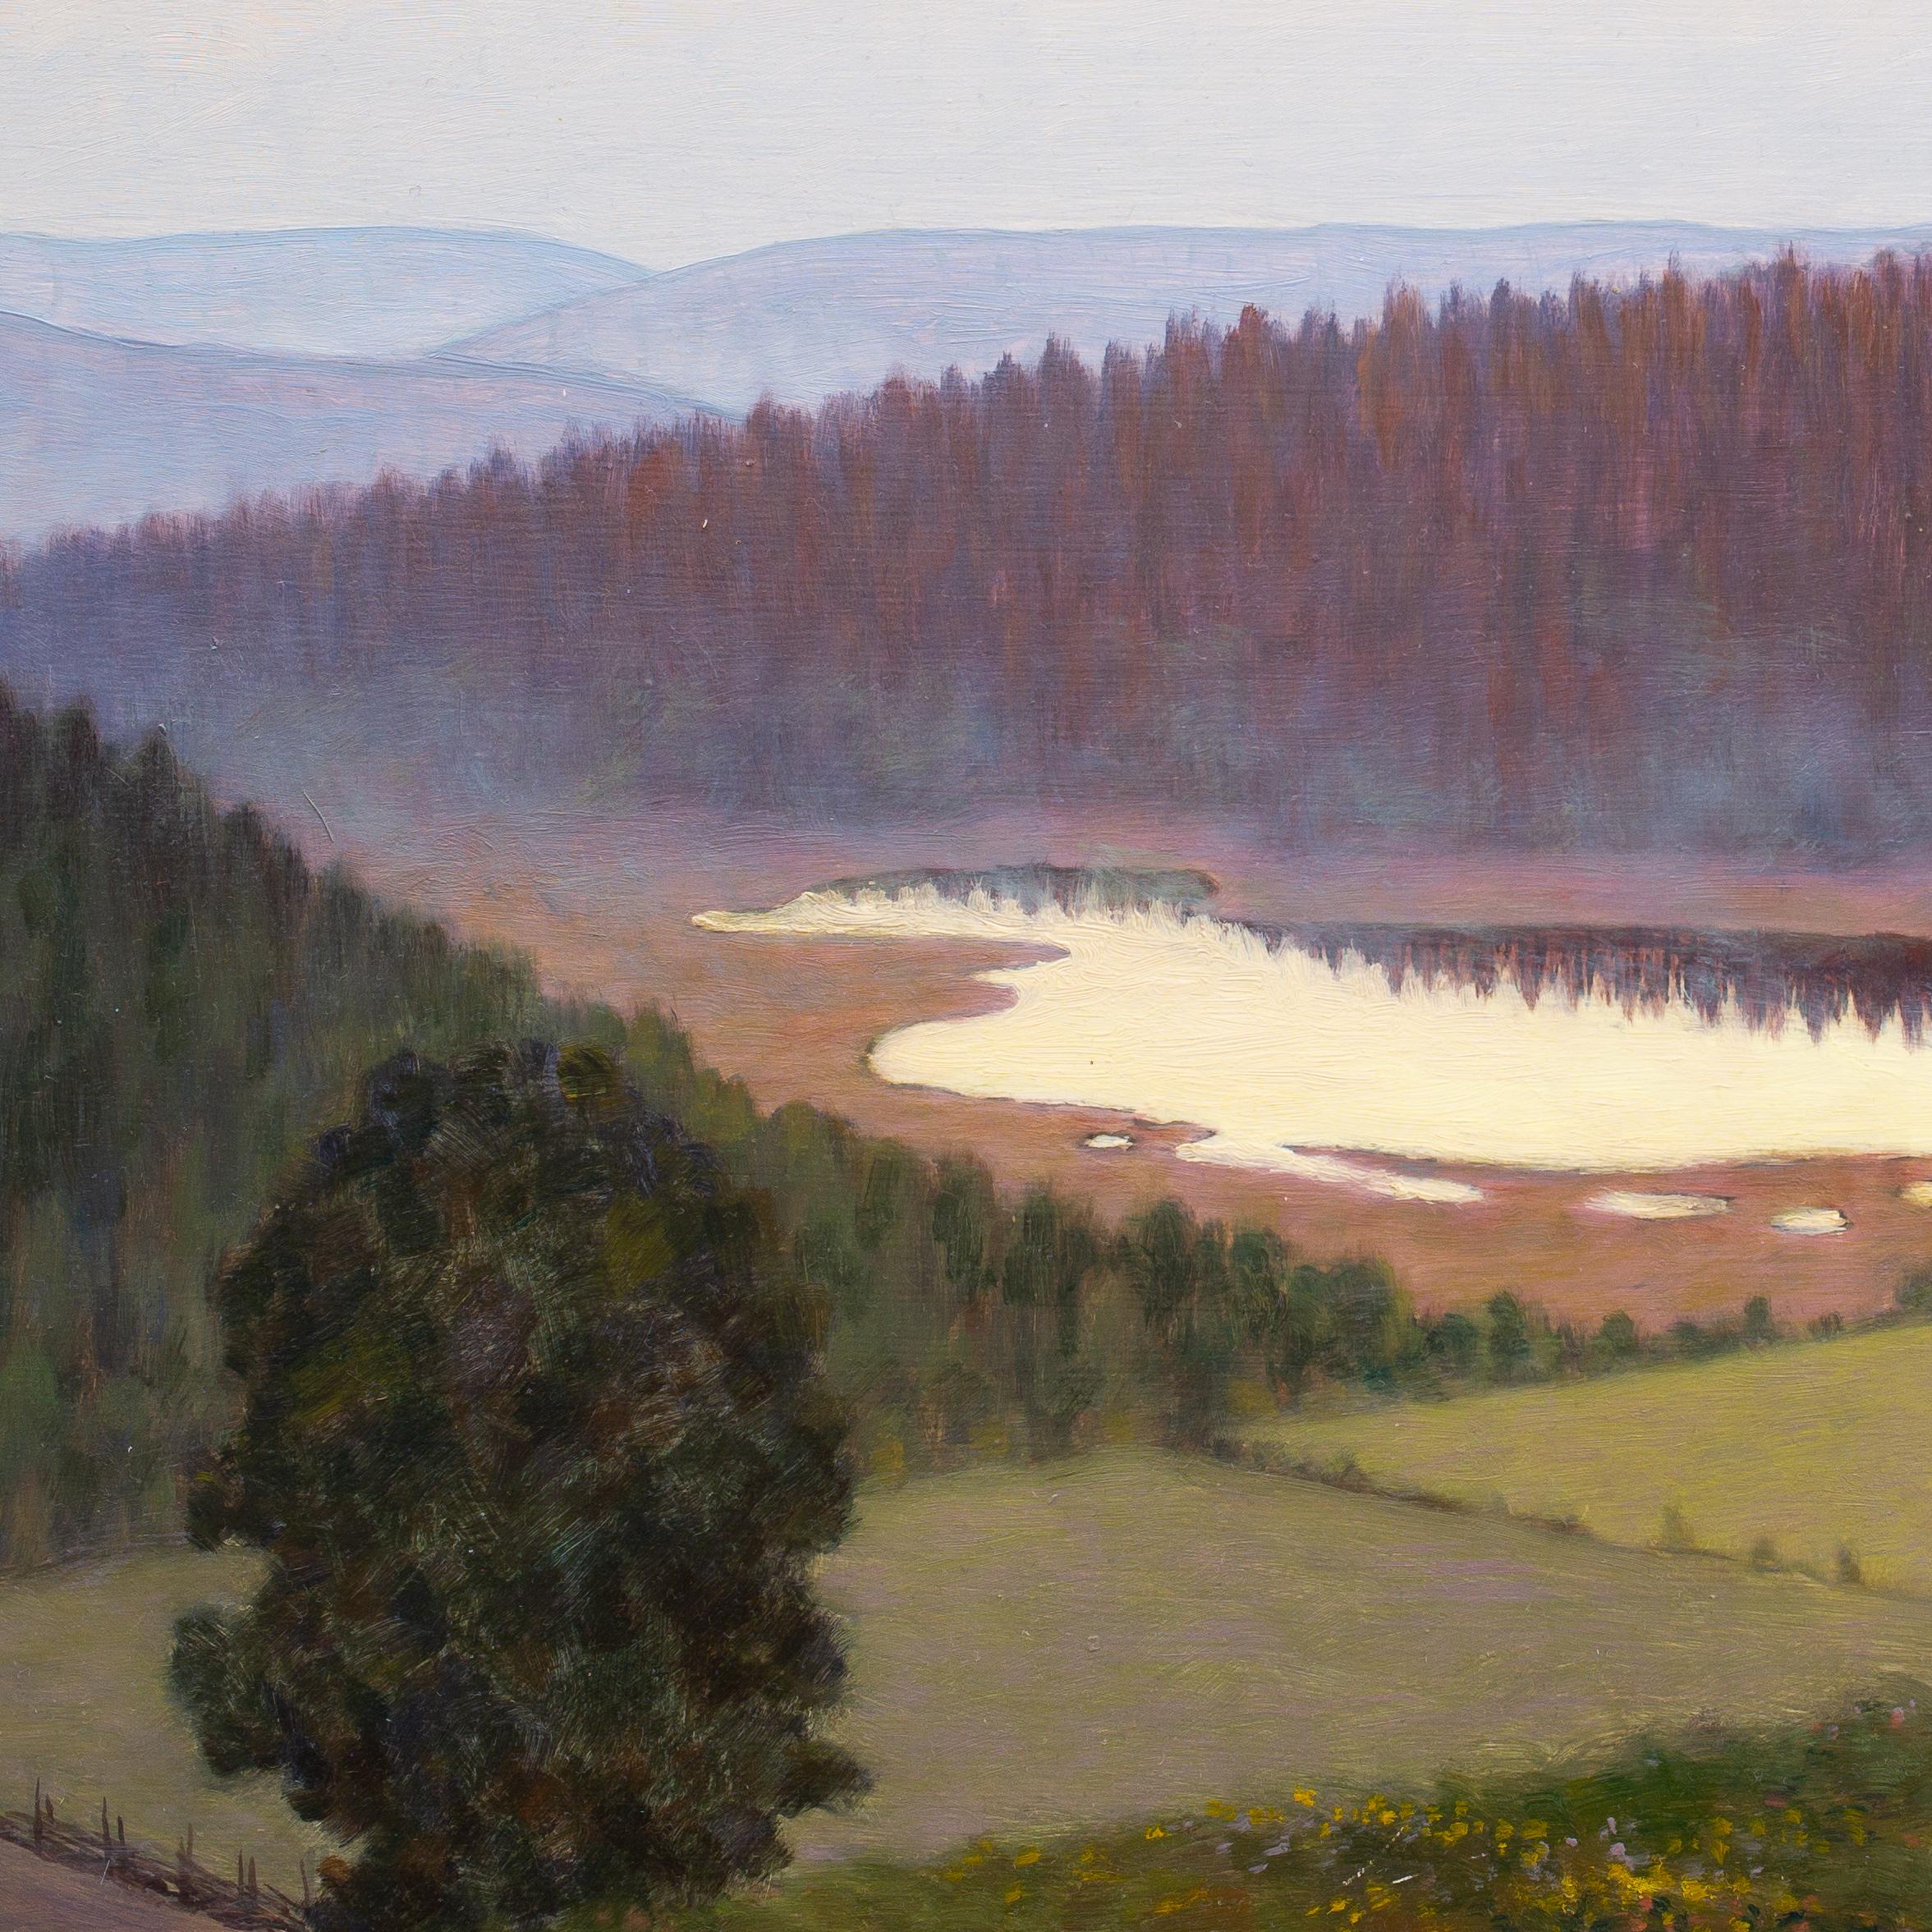 The Värmland artist Hilding Werner was a Swedish painter and draftsman.
He was the son of the landowner Anders Andersson and Inga Maria Johannesdotter. After finishing school at Karlstad University, Werner studied at Caleb Althin's painting school